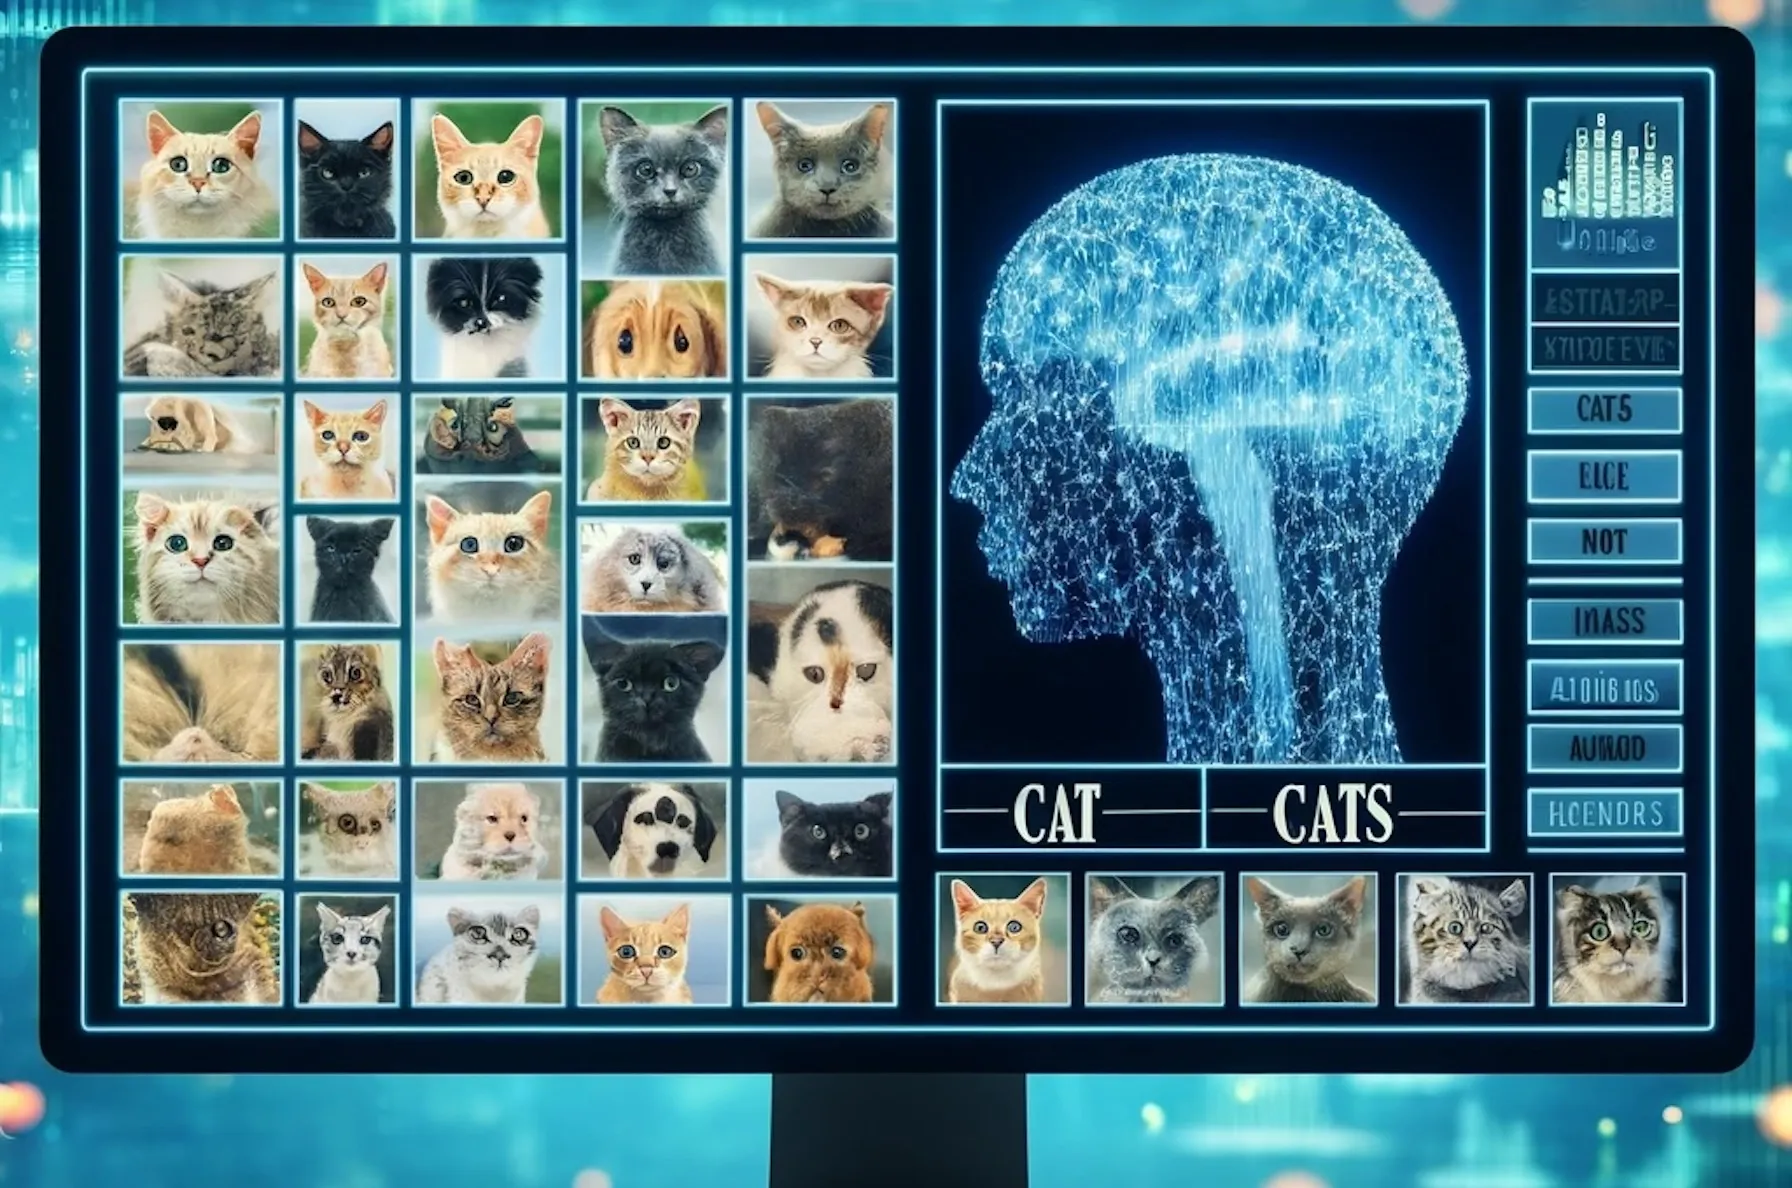 A digital display shows various cats next to a human profile with a brain network, indicating AI learning.